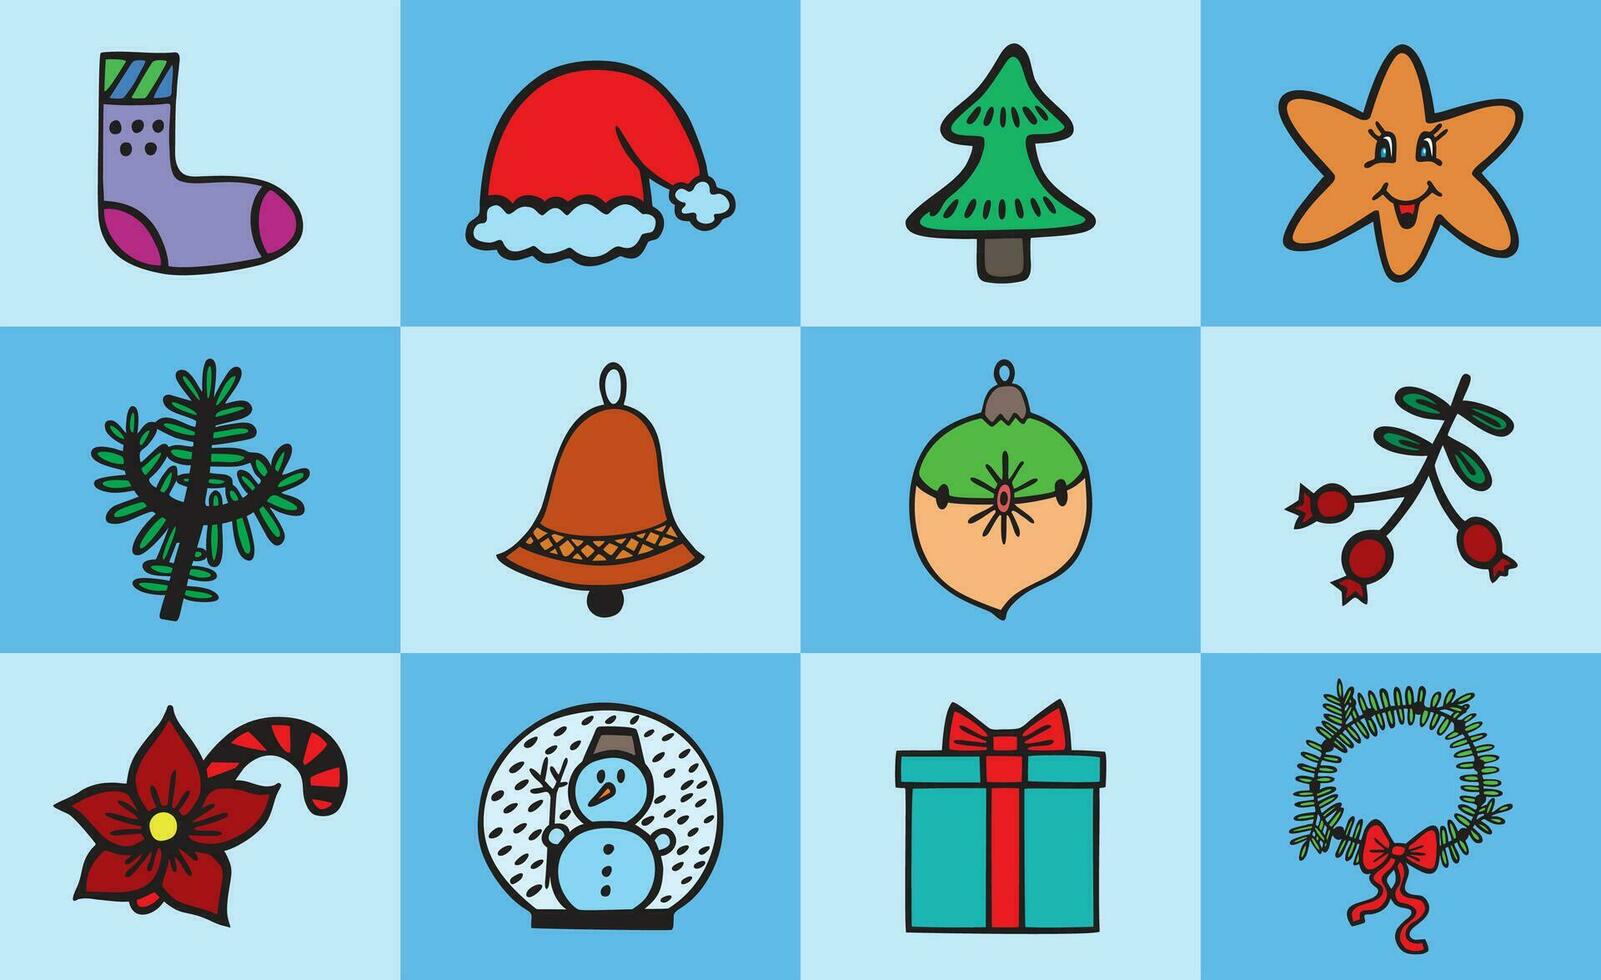 Xmas pattern with squares. Happy New Year icons in square shapes. Sock, hat, Christmas tree and others vector